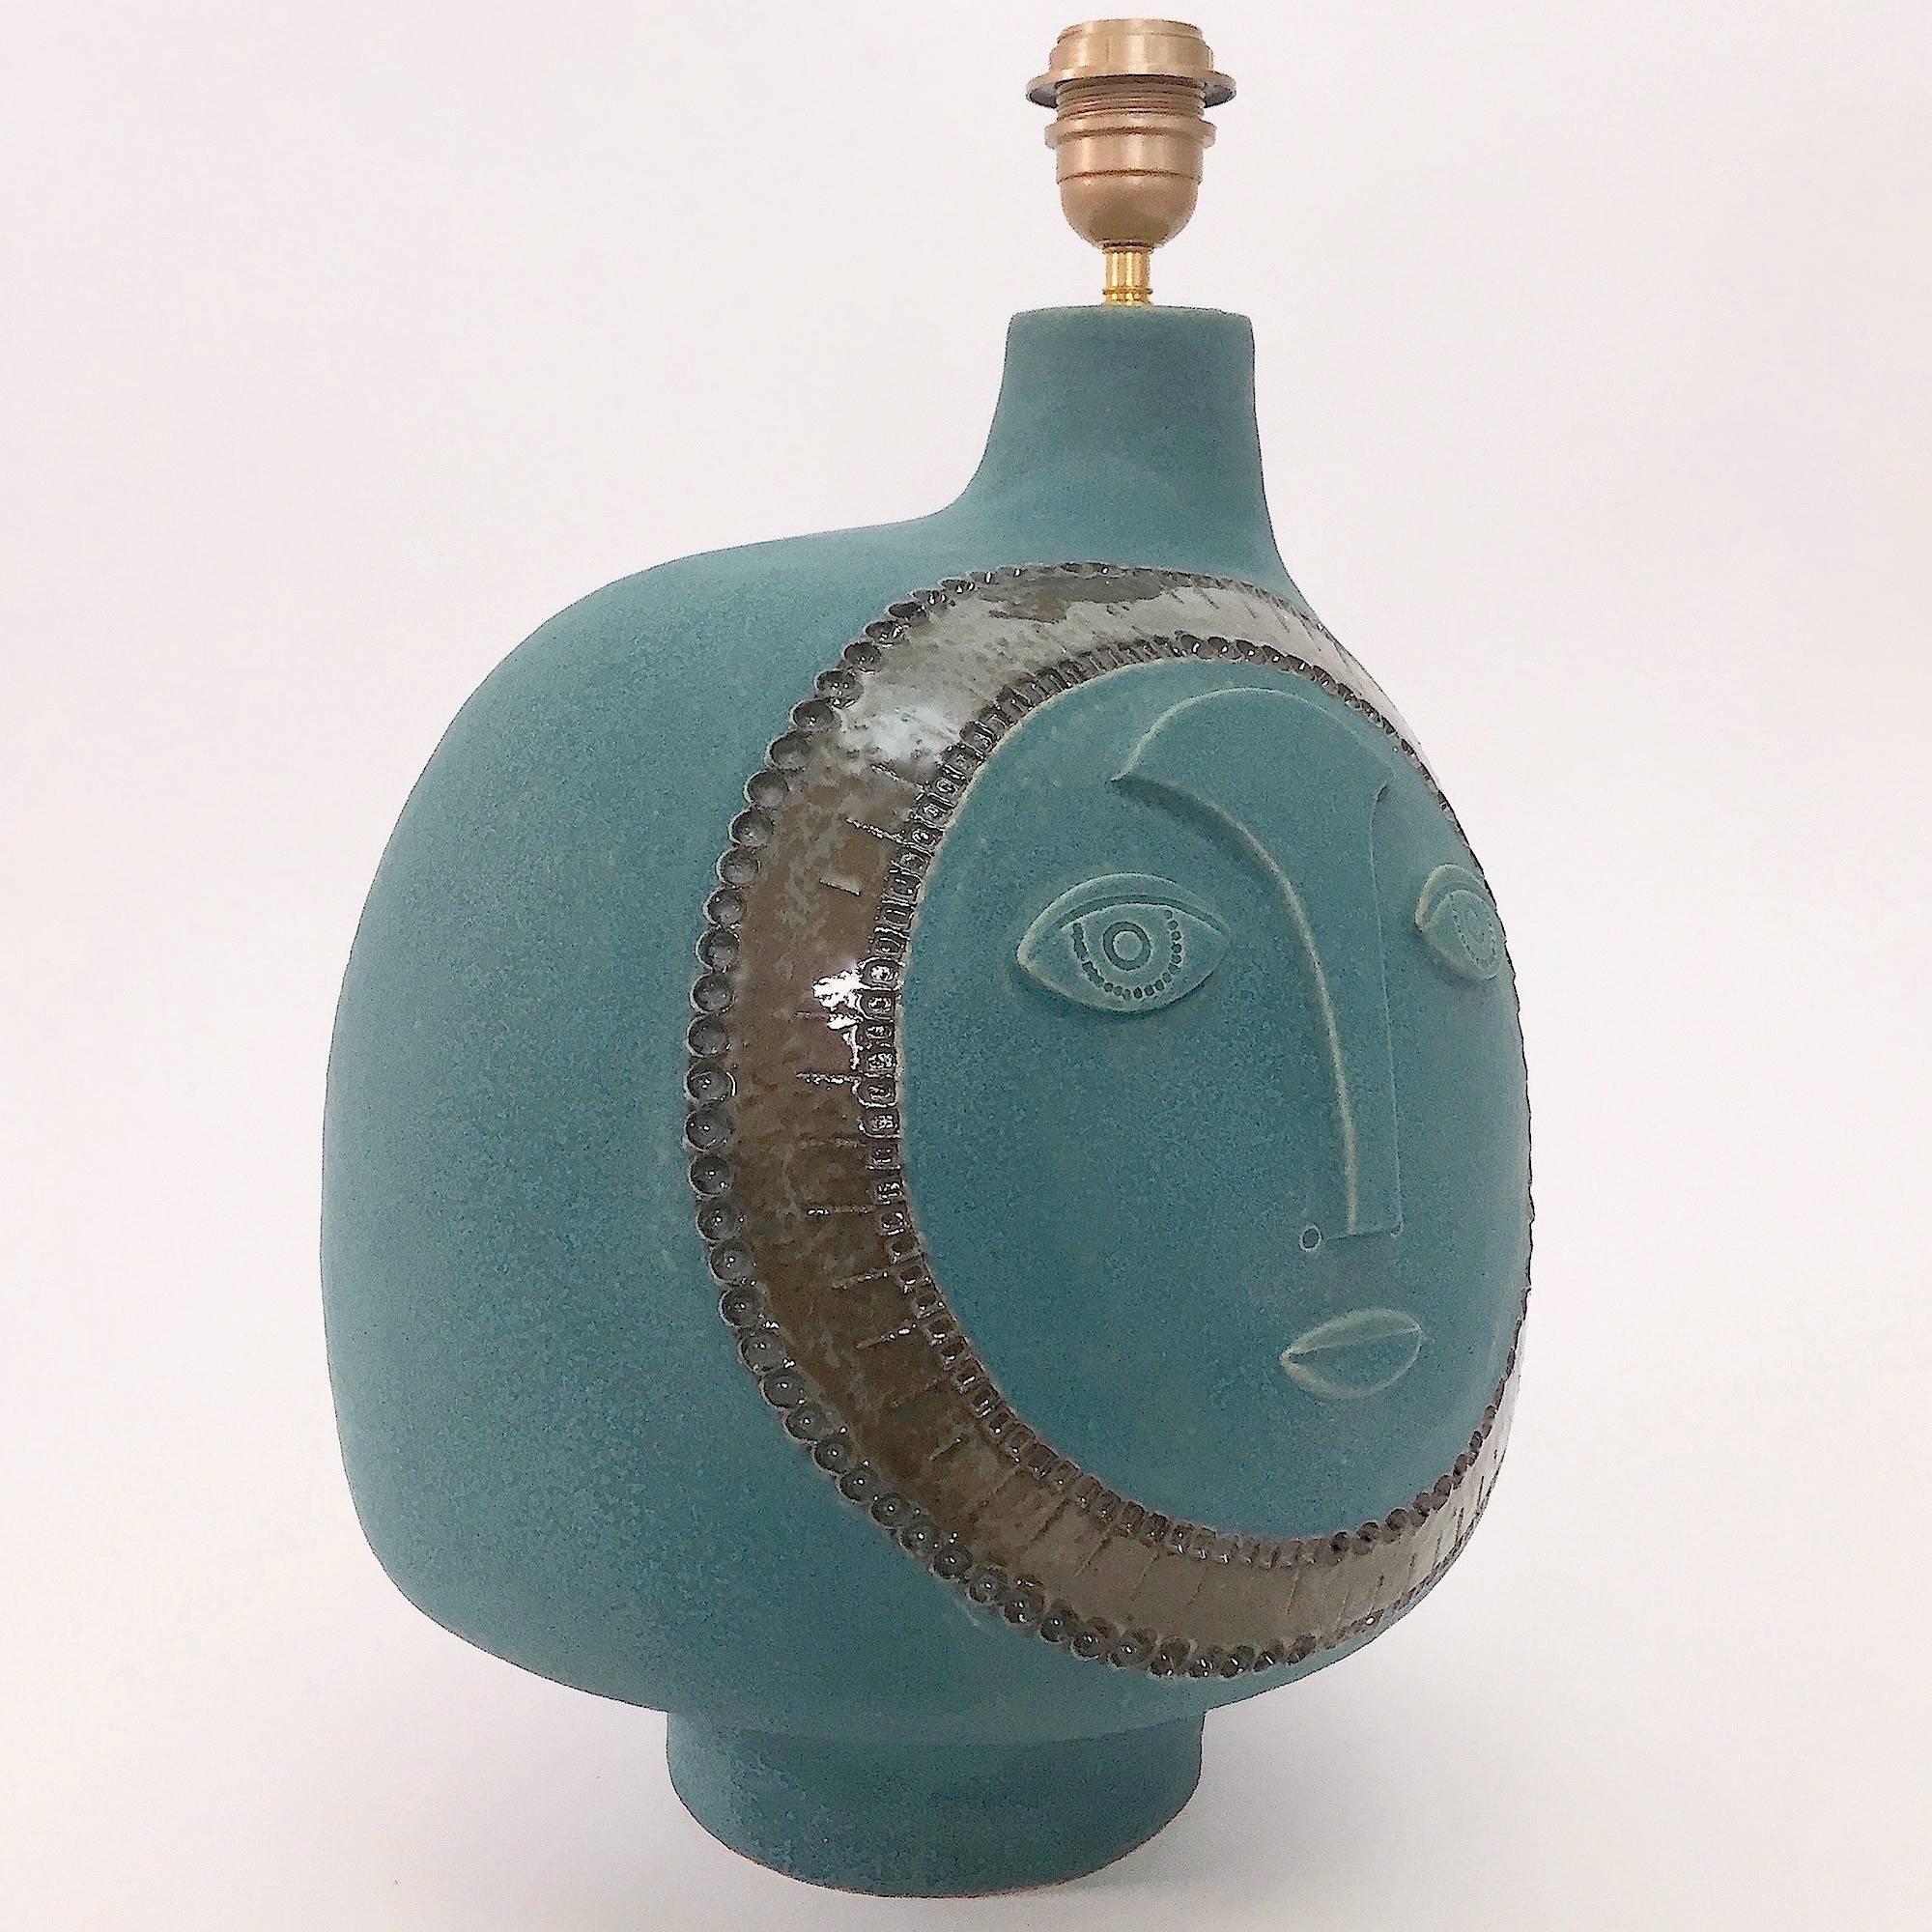 Large hand-sculpted ceramic lamp base, biomorphic shape. 
Stoneware glazed in shades of matte blue-green / dark turquoise, decorated with a stylized visage sculpted and incised in front, and over-glazed in shades of cloudy dark sea-gull